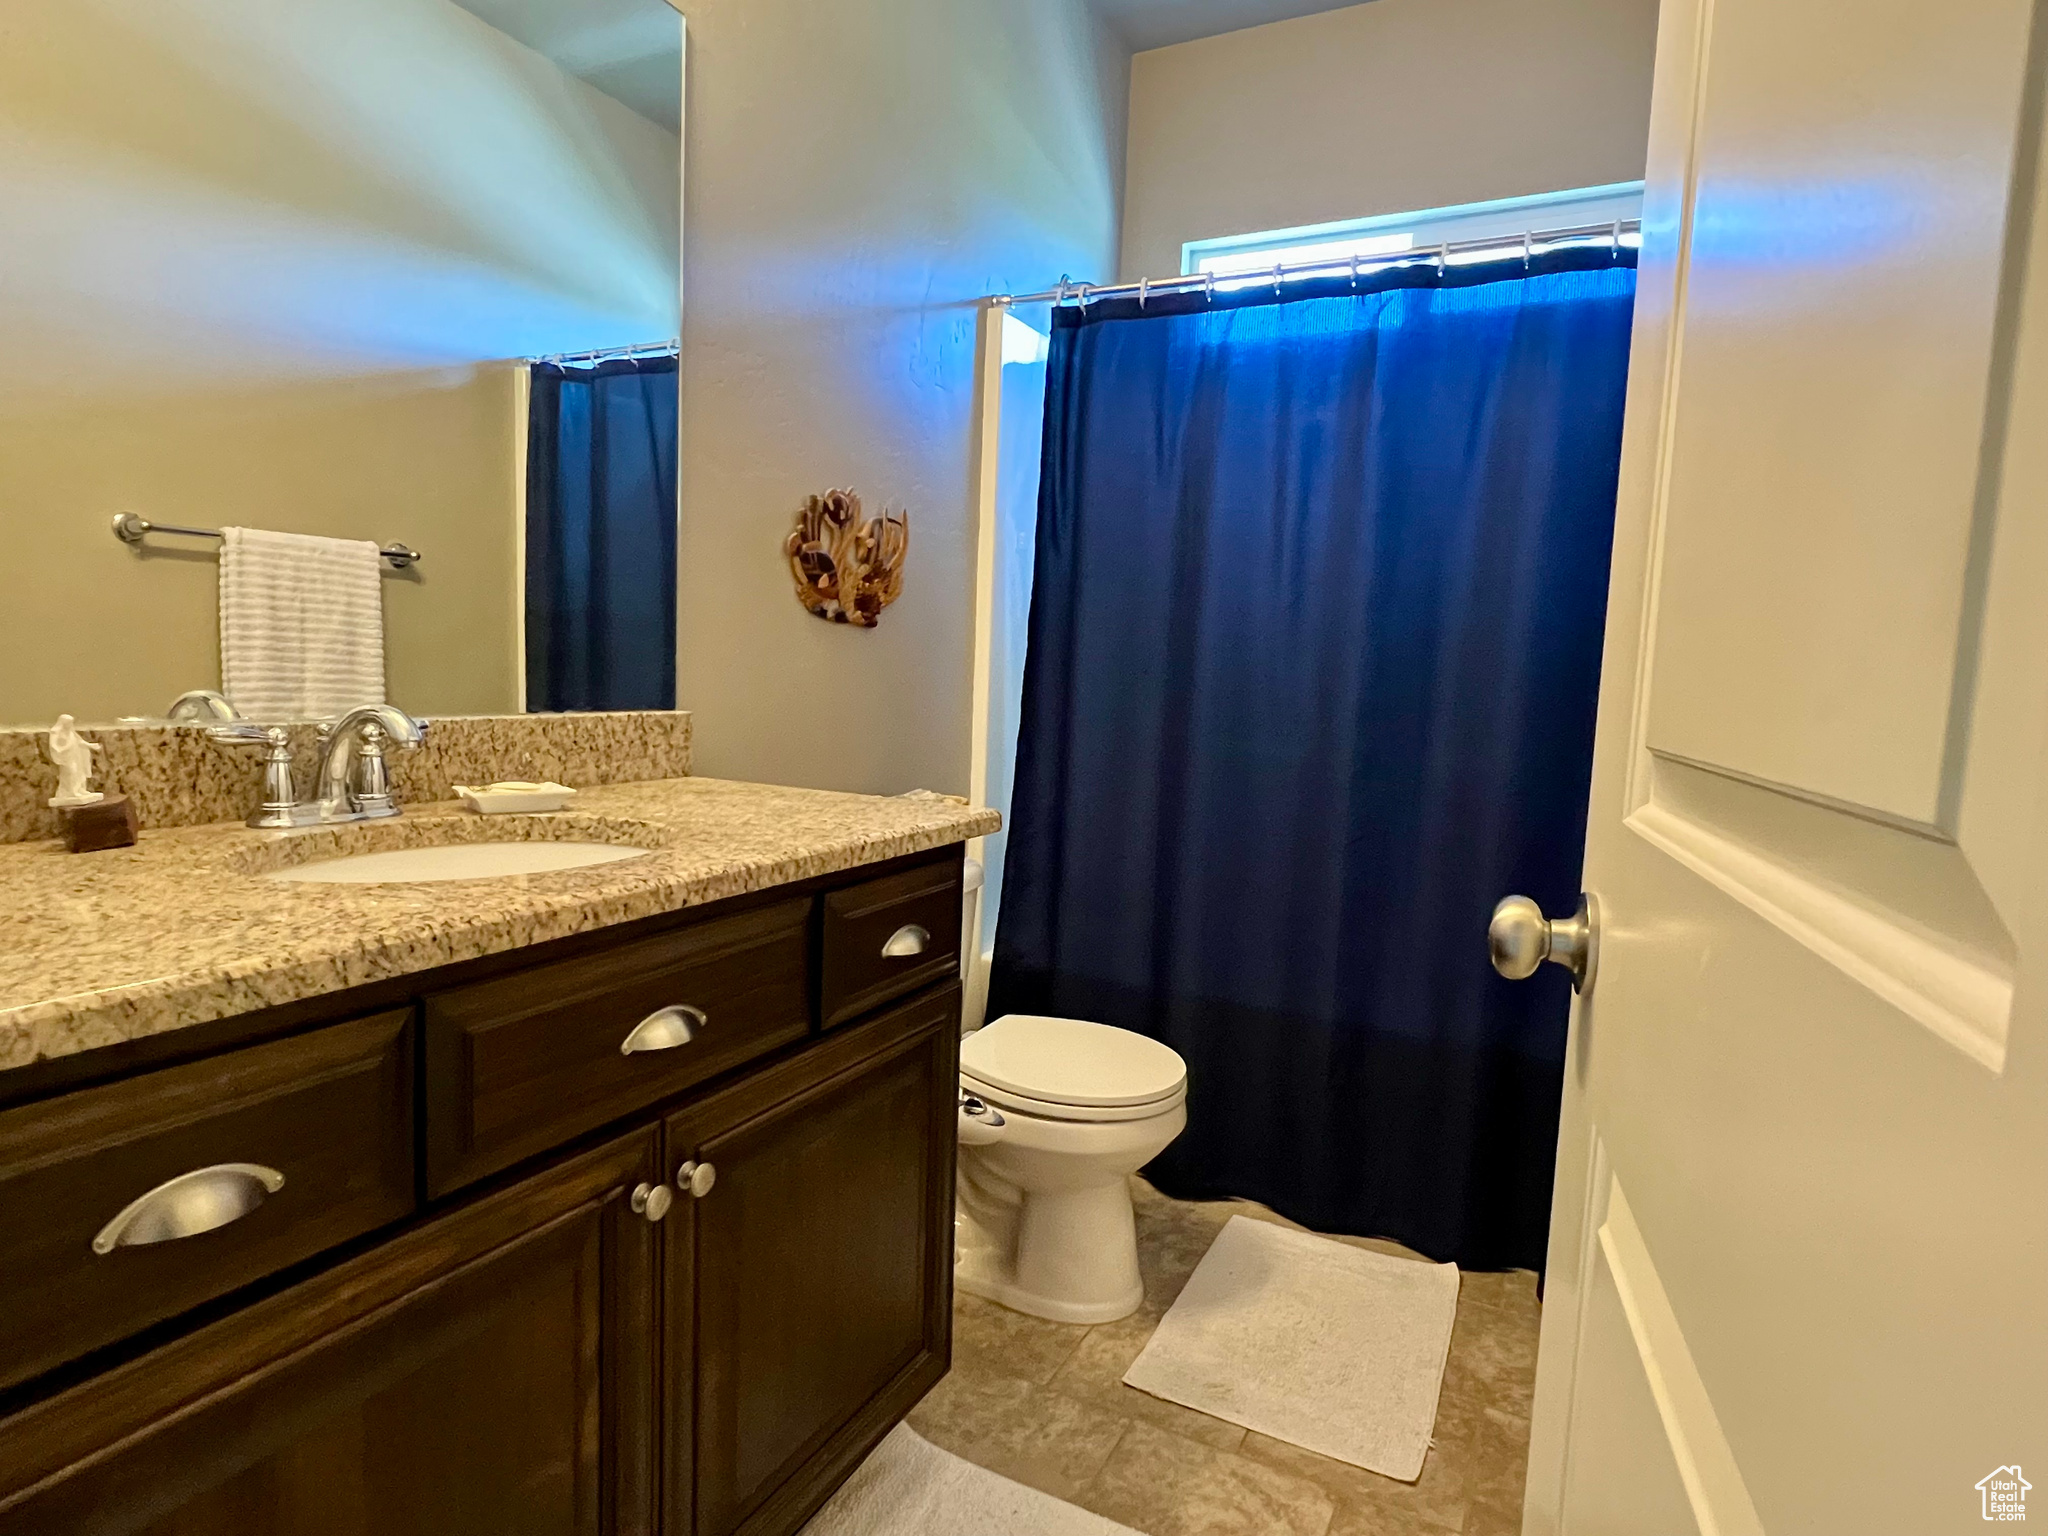 Bathroom featuring tile floors, vanity with granite counter tops , and toilet